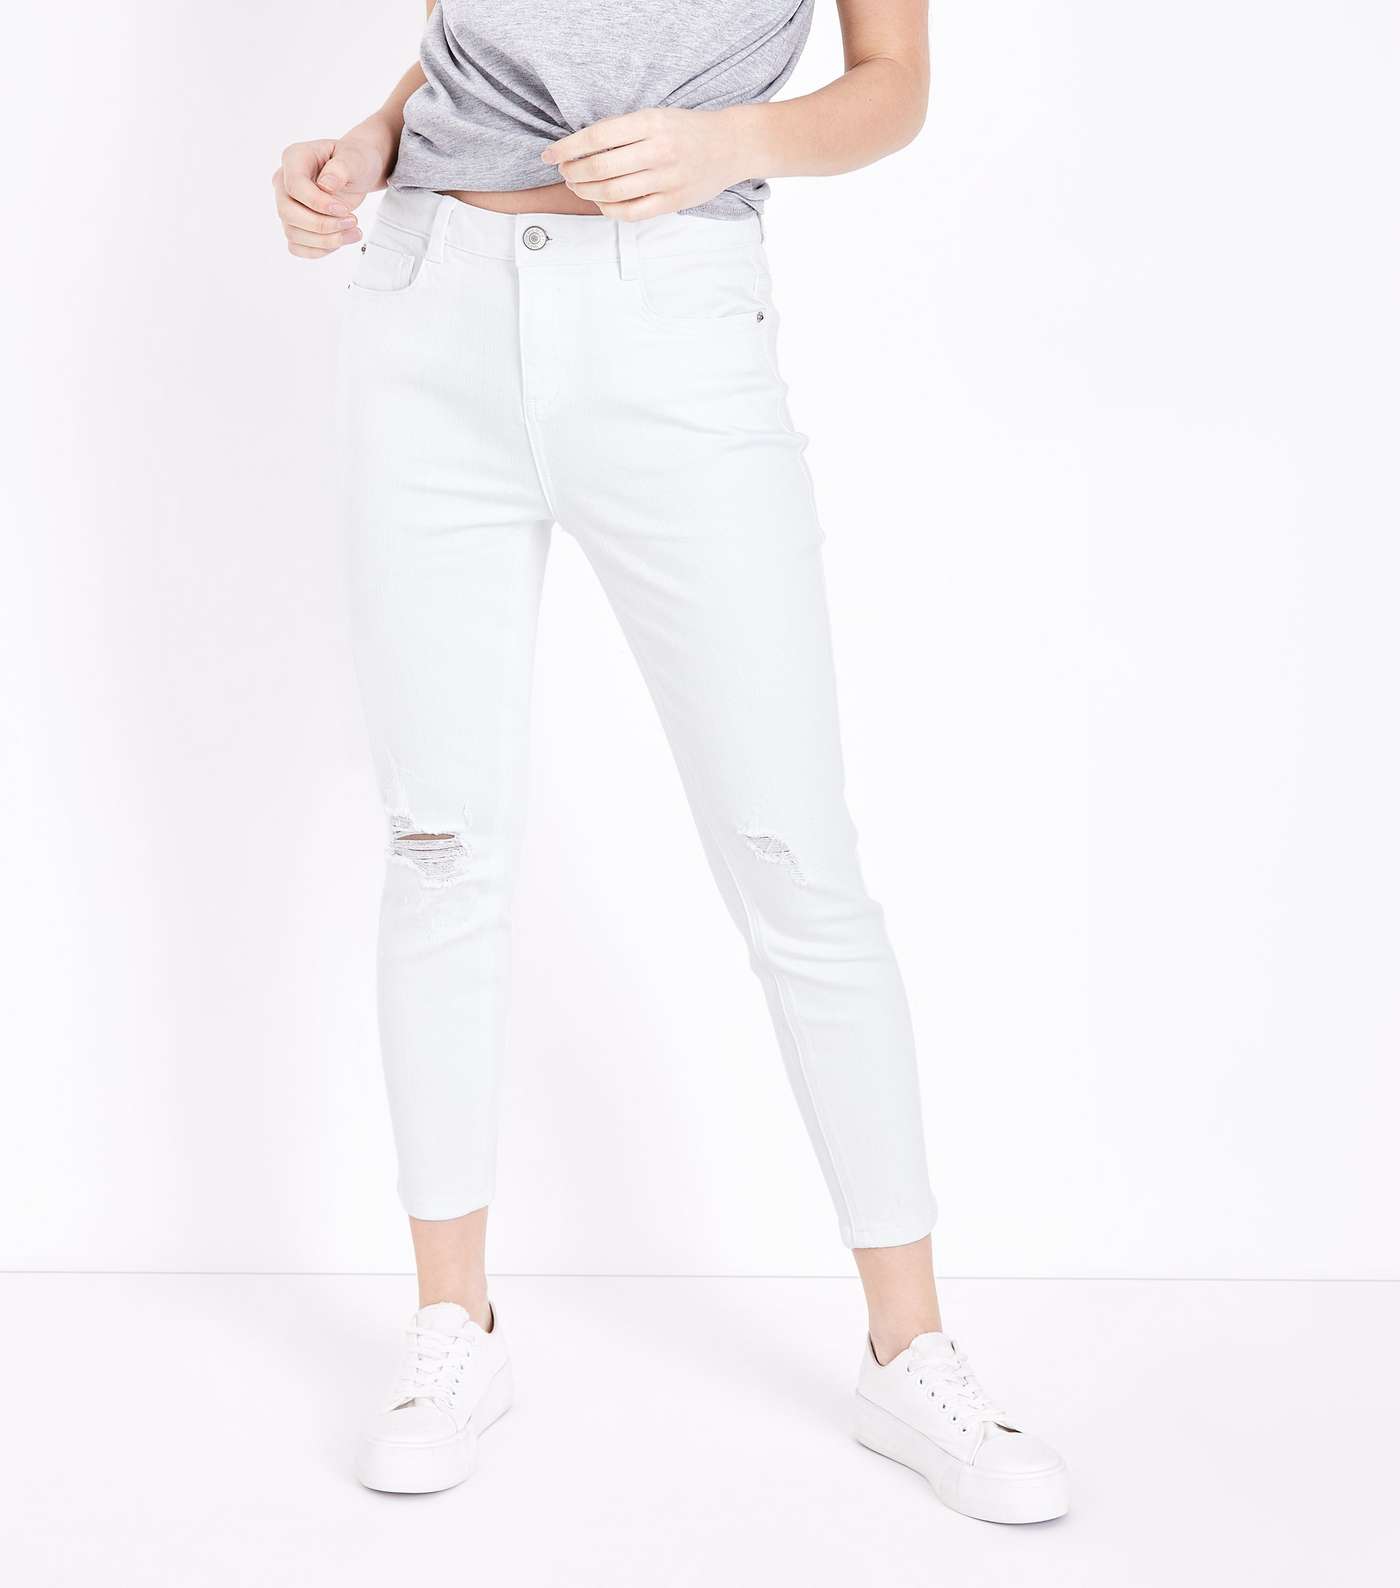 Petite White Ripped Skinny Jeans Image 2